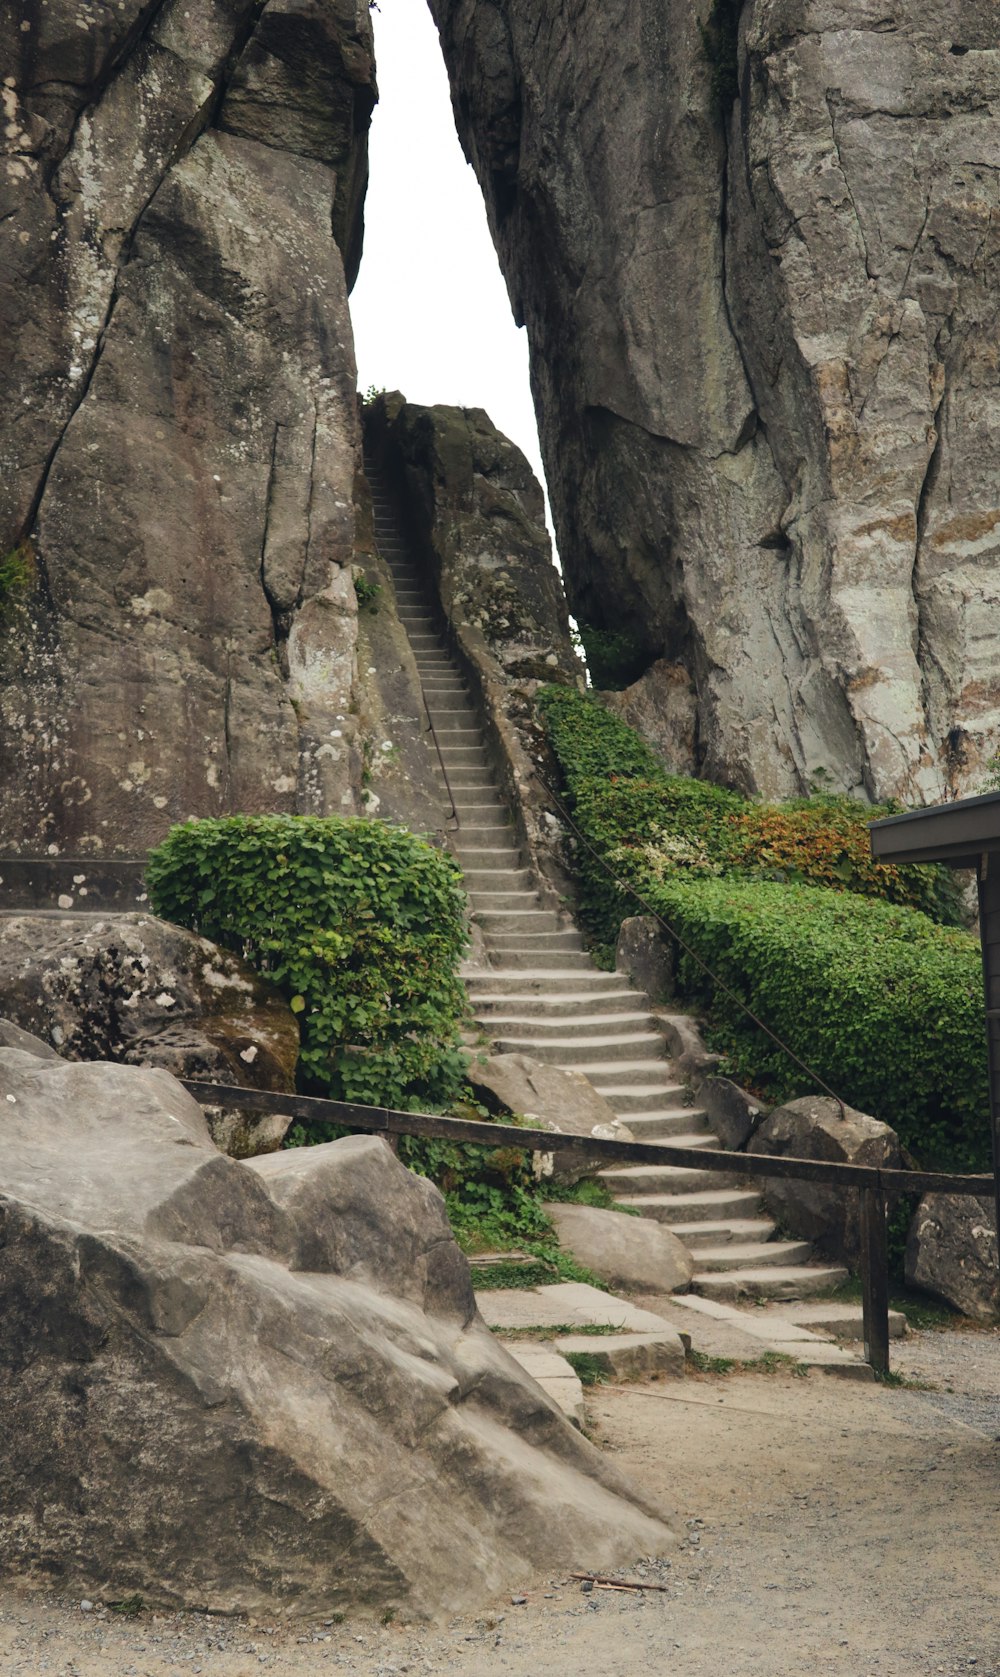 a stone staircase in a rocky area